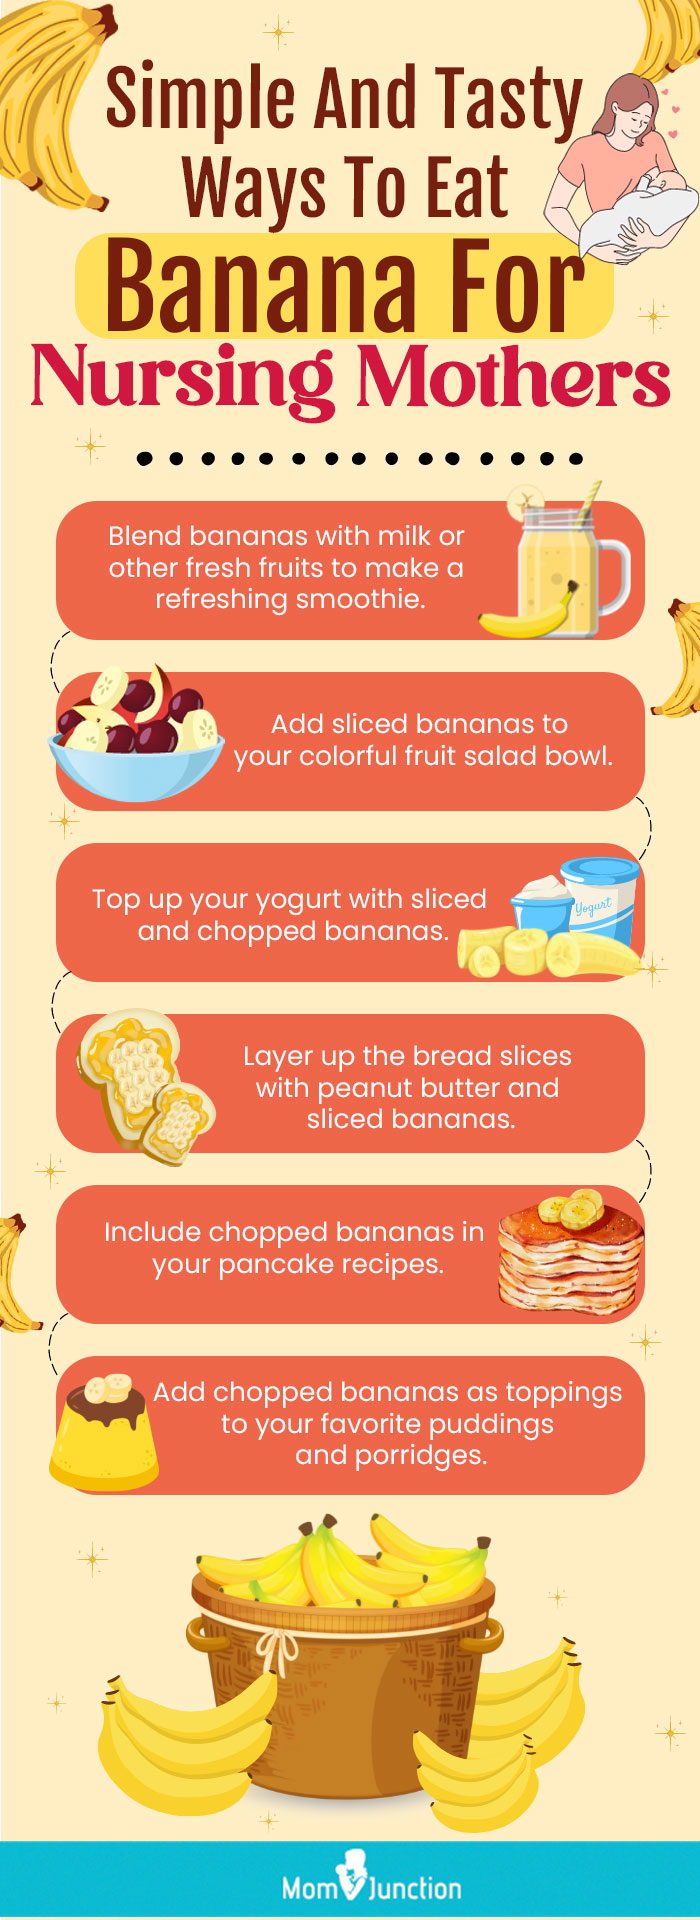 simple-and-tasty-ways-to-eat-banana-for-nursing-mother(图)